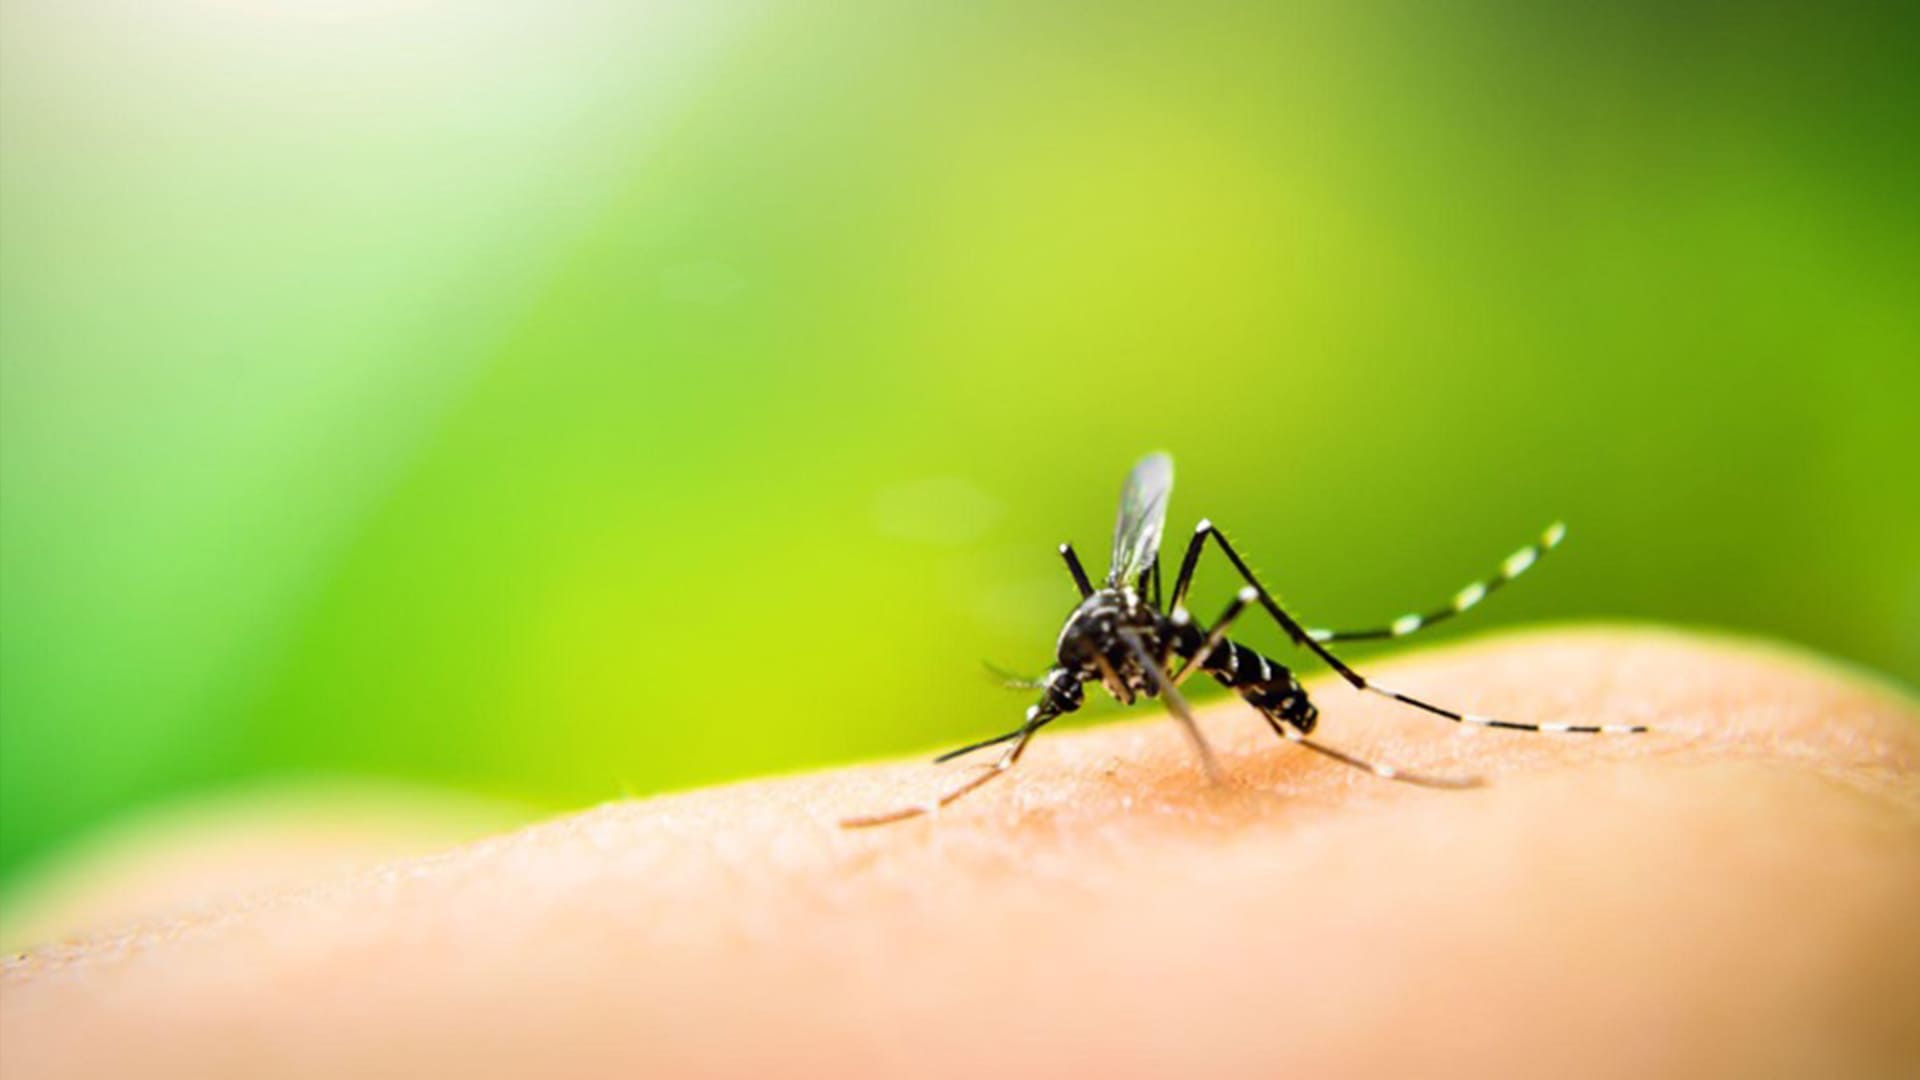 6 Common Misconceptions About Mosquitoes